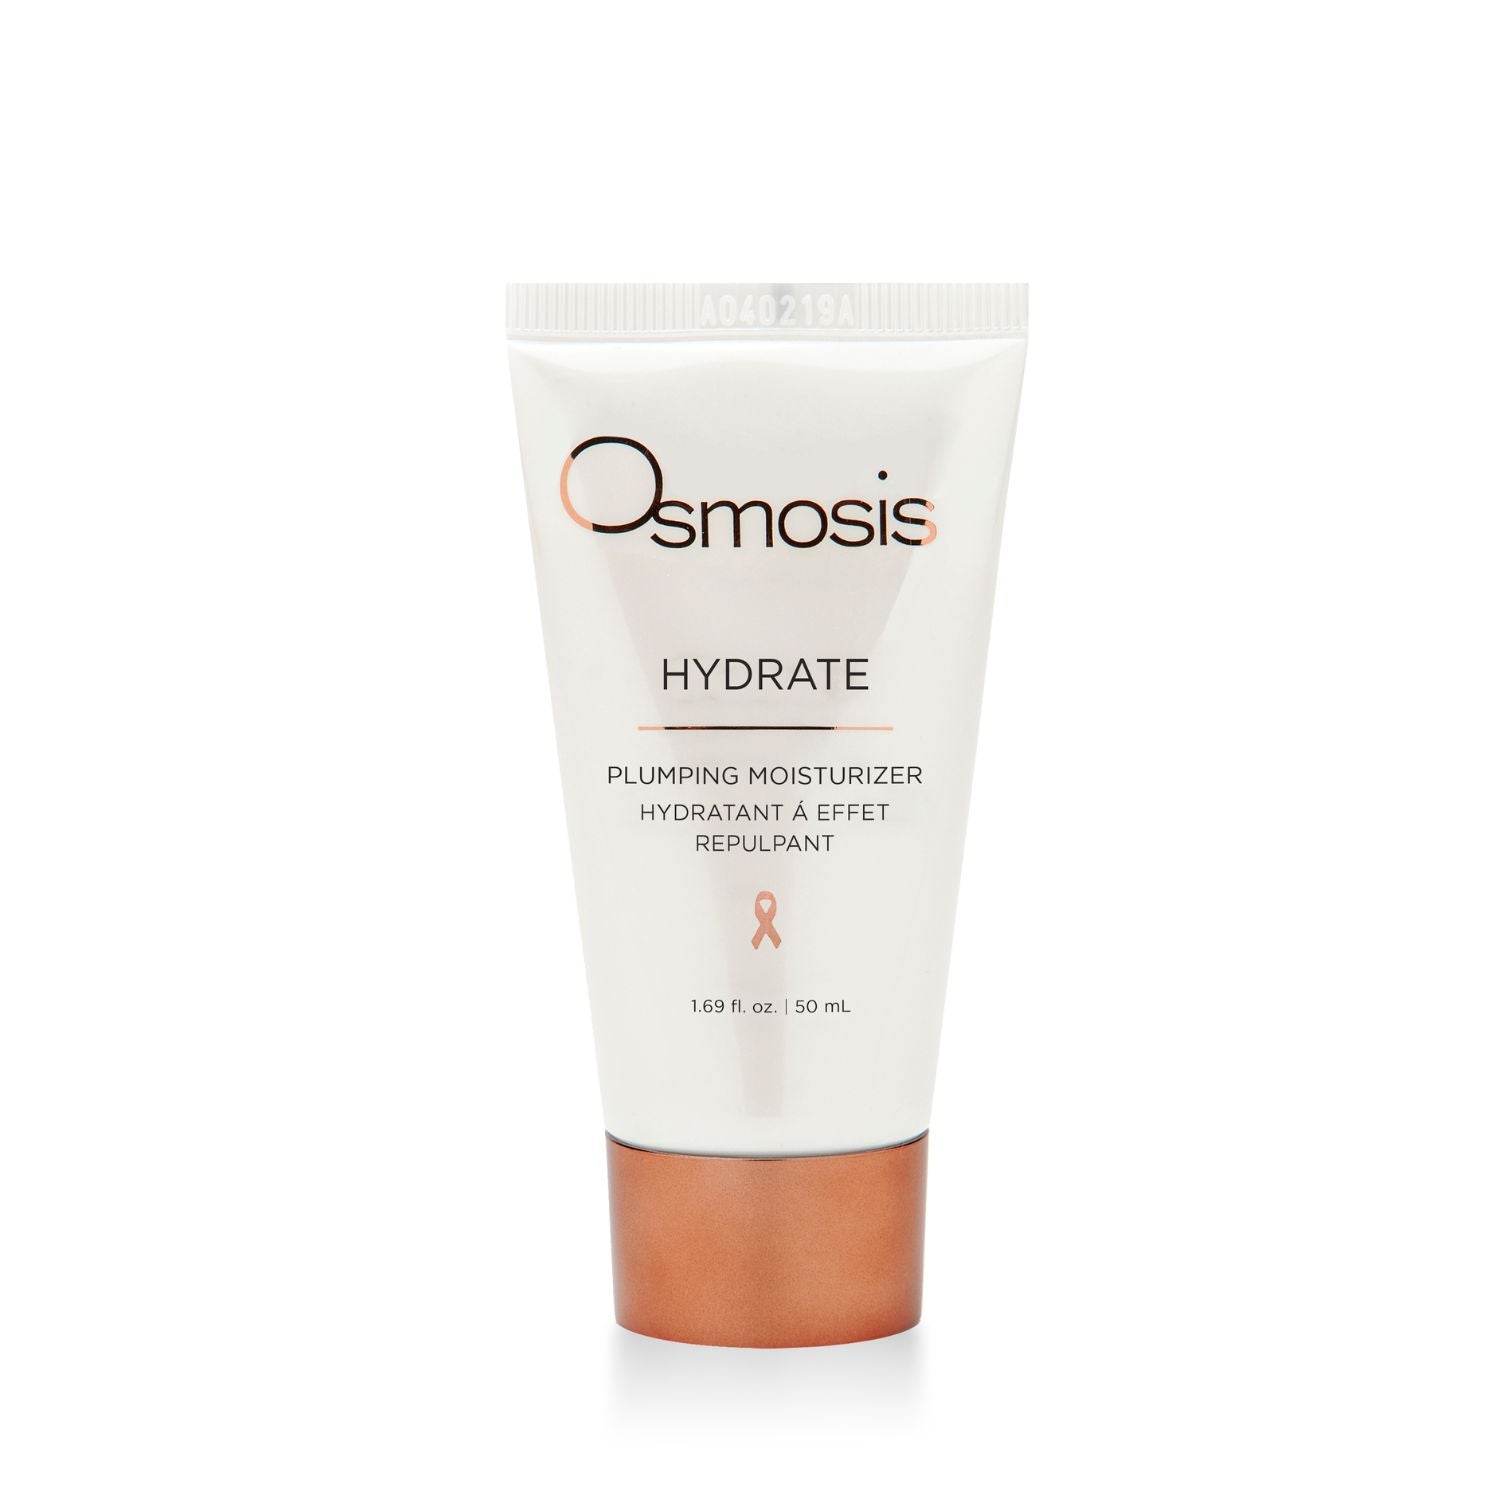 beauty container of osmosis hydrate moisturizer on white background